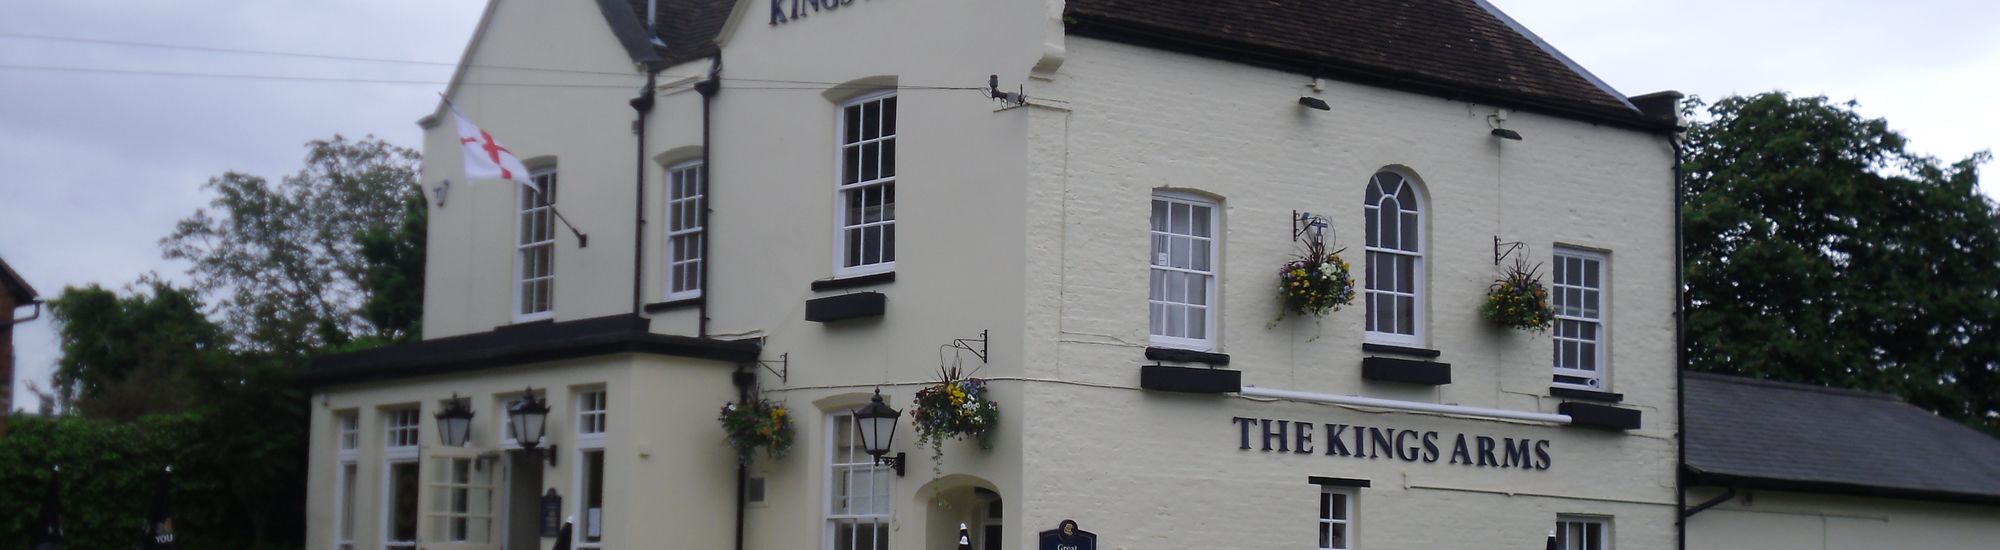 Kings Arms, Newport Pagnell